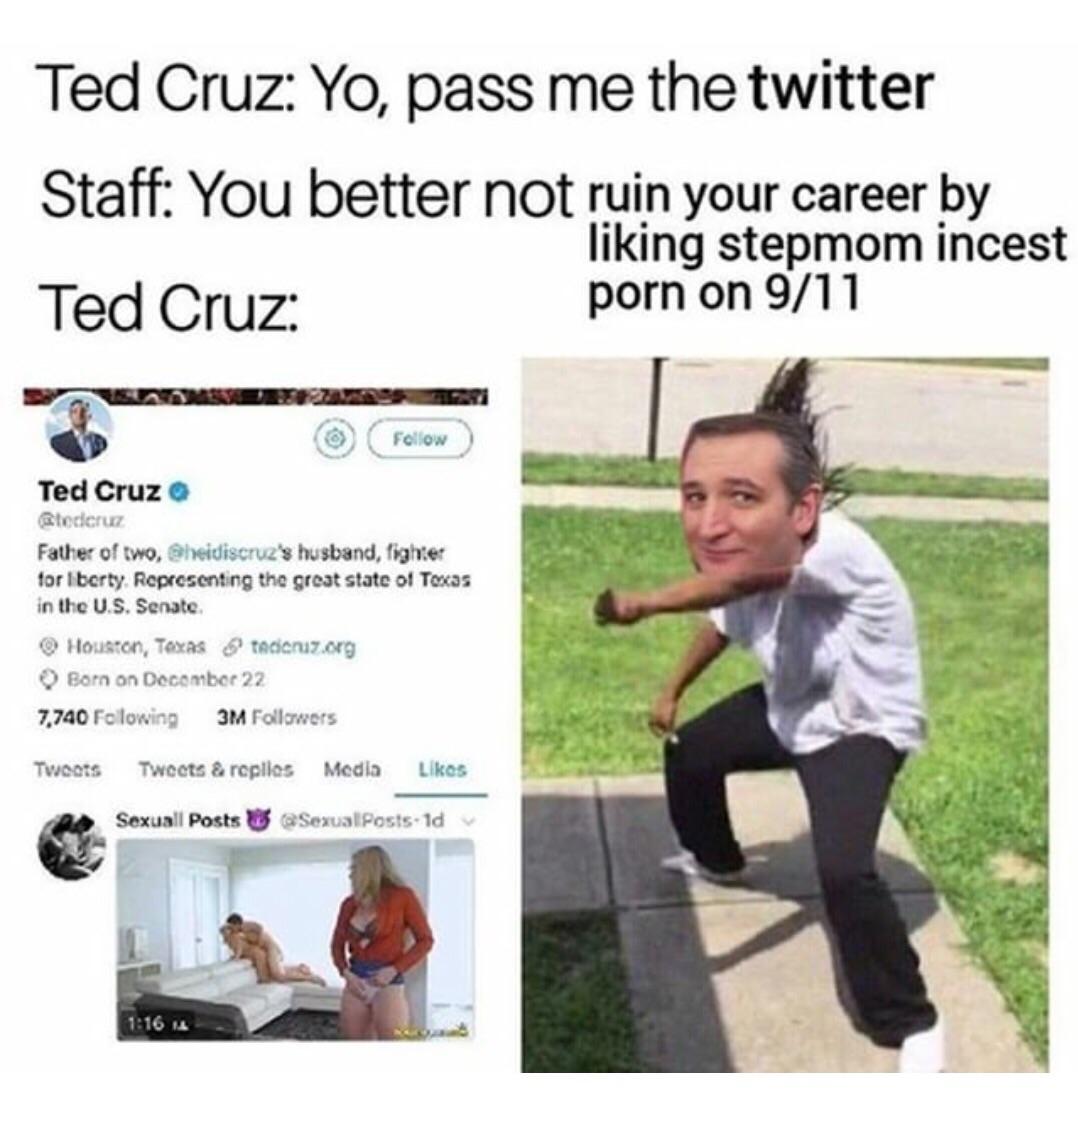 ted cruz twitter meme - Ted Cruz Yo, pass me the twitter Staff You better not ruin your career by liking stepmom incest Ted Cruz porn on 911 Ted Cruz Stederuz Father of two, heidiscruz's husband, lighter for Iberty Representing the great state of Texas in